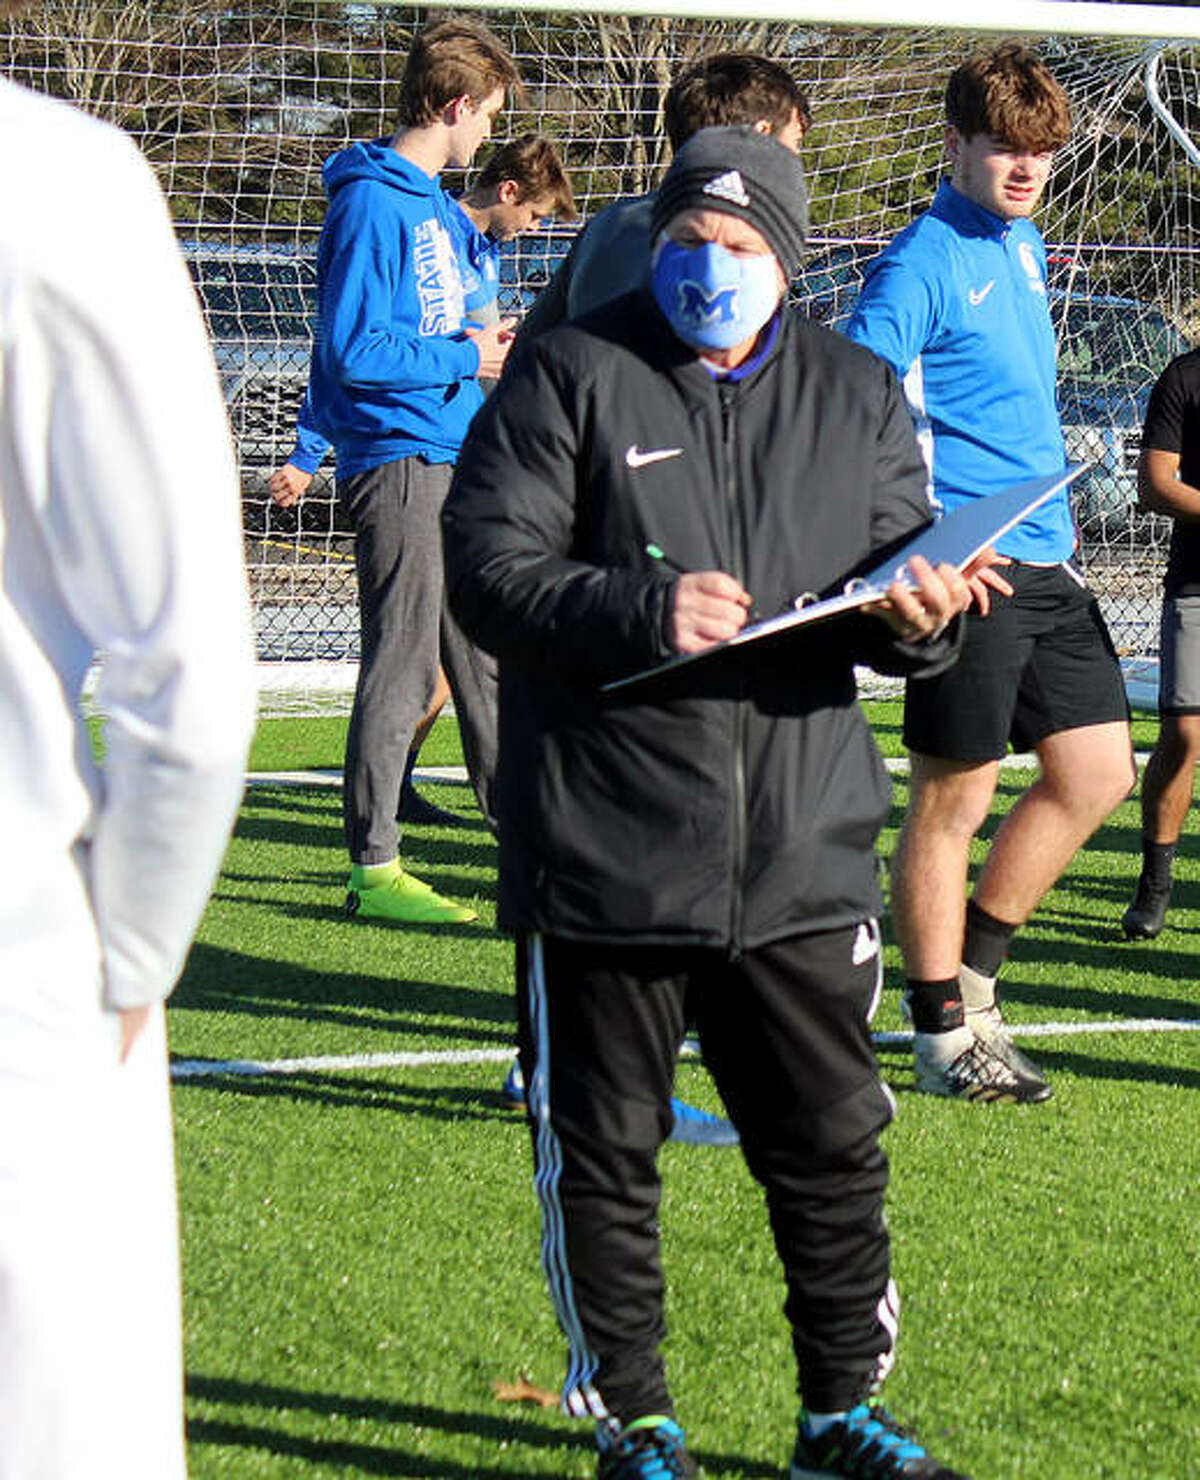 New Marquette catholic high boys soccer coach Jerry DiSalvo gathers his players for the first official preseason practice Monday at Gordon Moore Park.